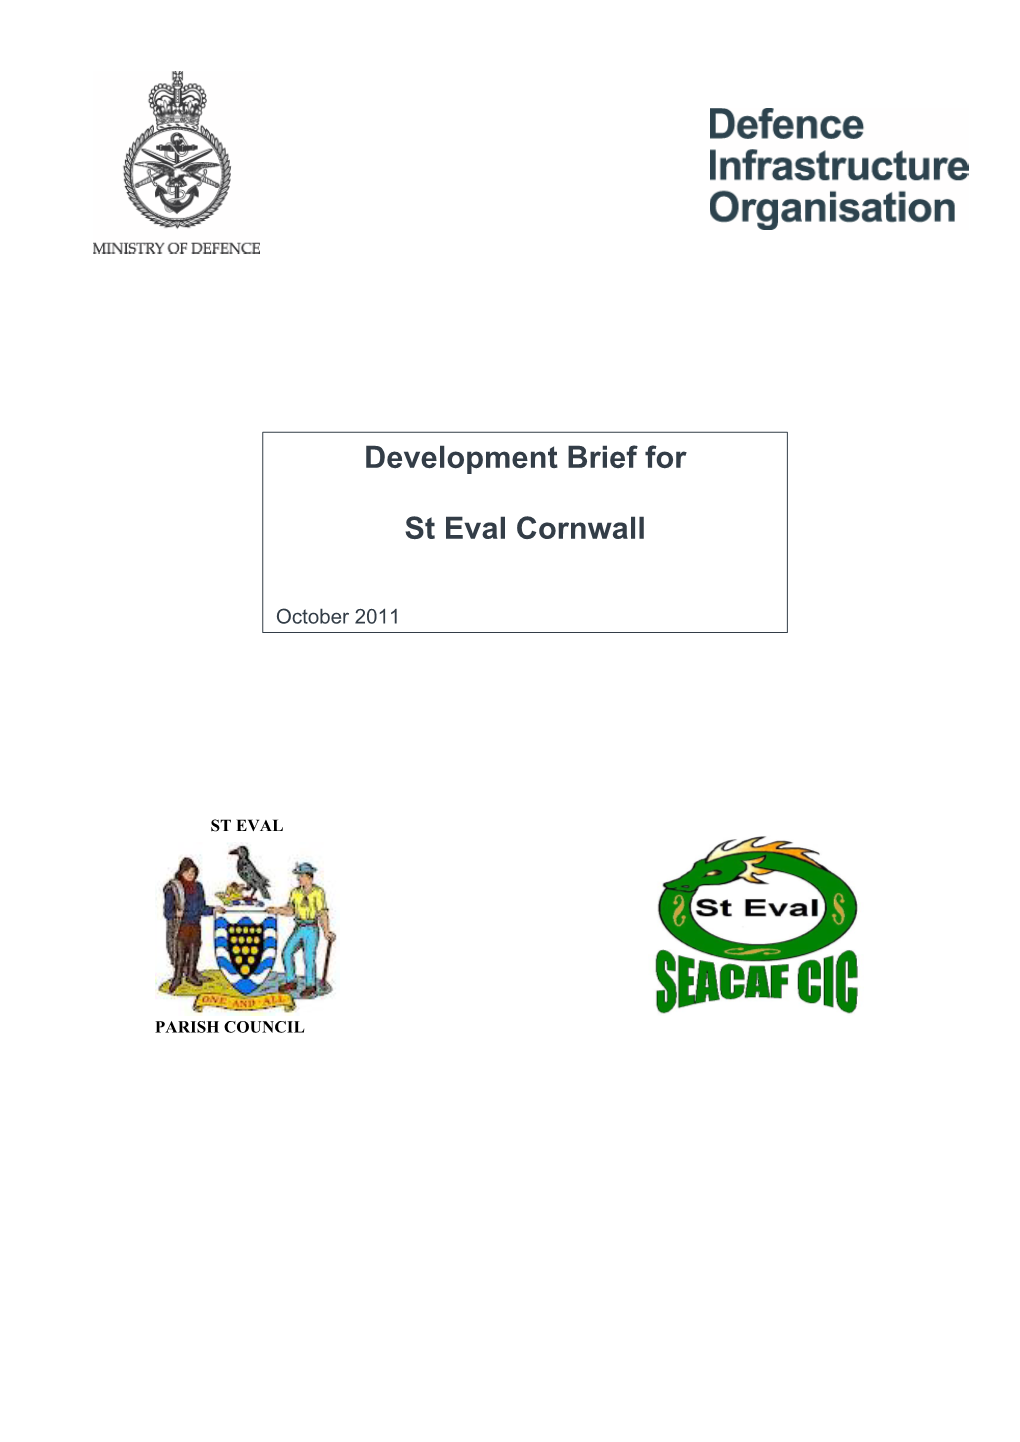 Development Brief for St Eval Cornwall